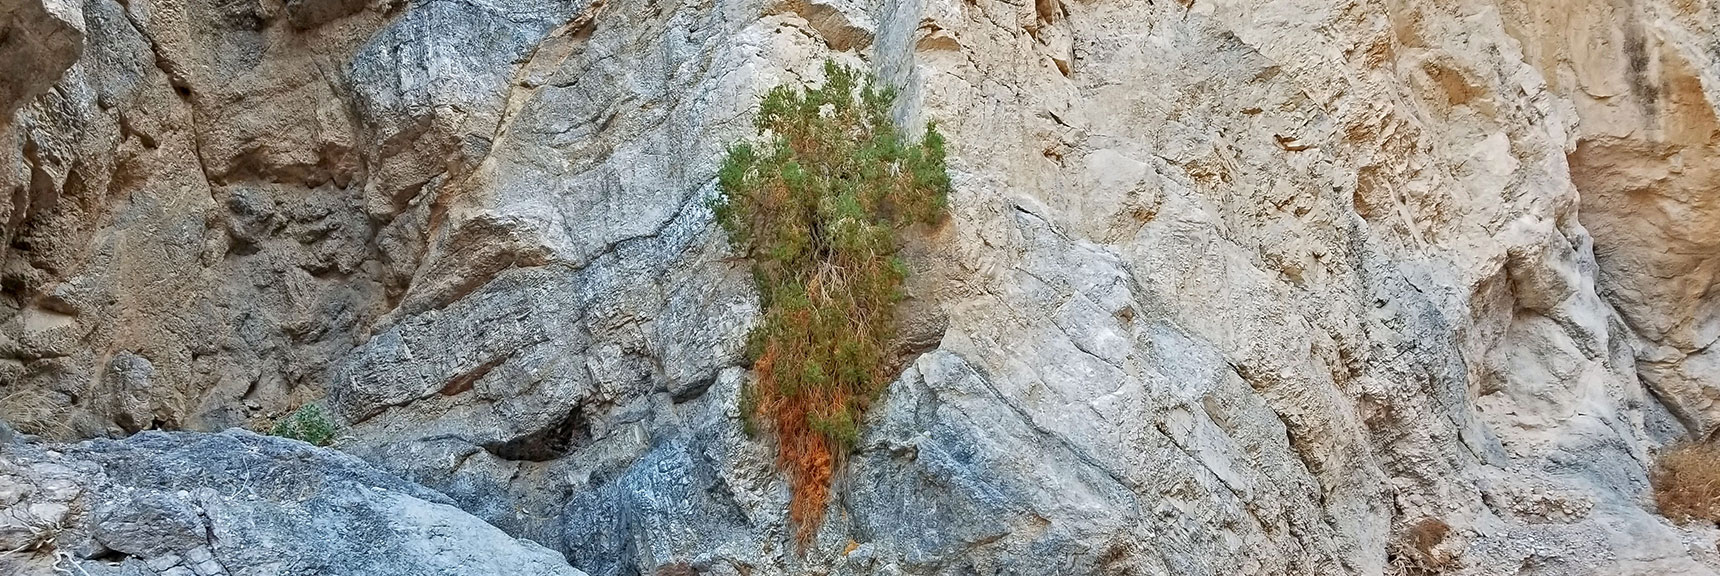 Beautiful Hanging Plants Cascading Down the Canyon Walls | Fall Canyon | Death Valley National Park, California